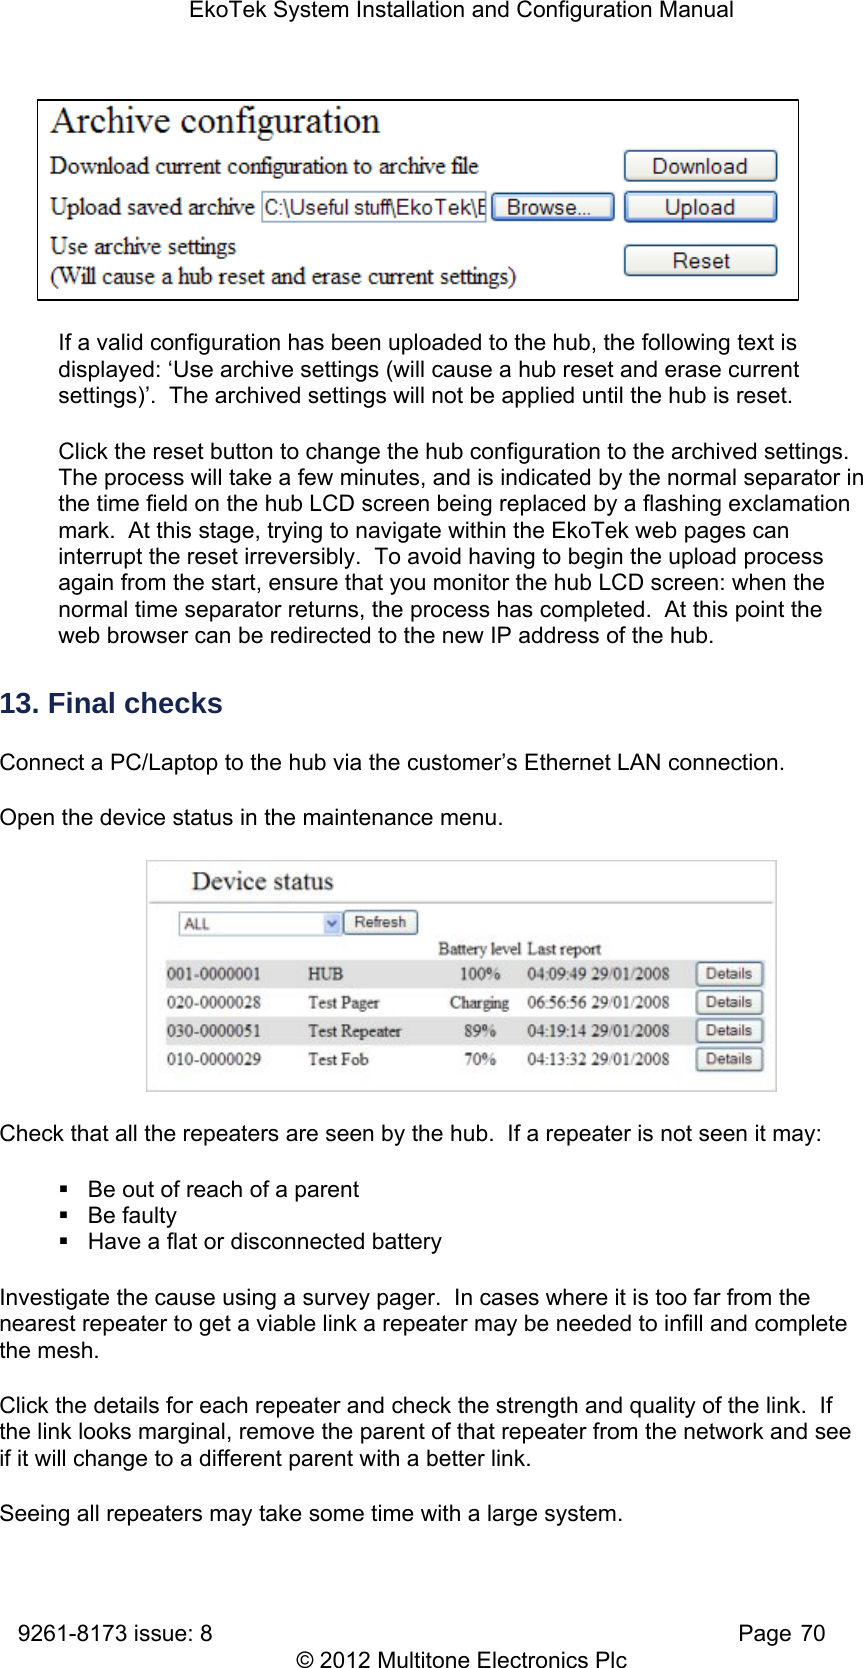 EkoTek System Installation and Configuration Manual 9261-8173 issue: 8   Page 70 © 2012 Multitone Electronics Plc  If a valid configuration has been uploaded to the hub, the following text is displayed: ‘Use archive settings (will cause a hub reset and erase current settings)’.  The archived settings will not be applied until the hub is reset. Click the reset button to change the hub configuration to the archived settings.  The process will take a few minutes, and is indicated by the normal separator in the time field on the hub LCD screen being replaced by a flashing exclamation mark.  At this stage, trying to navigate within the EkoTek web pages can interrupt the reset irreversibly.  To avoid having to begin the upload process again from the start, ensure that you monitor the hub LCD screen: when the normal time separator returns, the process has completed.  At this point the web browser can be redirected to the new IP address of the hub.   13. Final checks Connect a PC/Laptop to the hub via the customer’s Ethernet LAN connection. Open the device status in the maintenance menu.  Check that all the repeaters are seen by the hub.  If a repeater is not seen it may:   Be out of reach of a parent  Be faulty   Have a flat or disconnected battery Investigate the cause using a survey pager.  In cases where it is too far from the nearest repeater to get a viable link a repeater may be needed to infill and complete the mesh. Click the details for each repeater and check the strength and quality of the link.  If the link looks marginal, remove the parent of that repeater from the network and see if it will change to a different parent with a better link. Seeing all repeaters may take some time with a large system. 